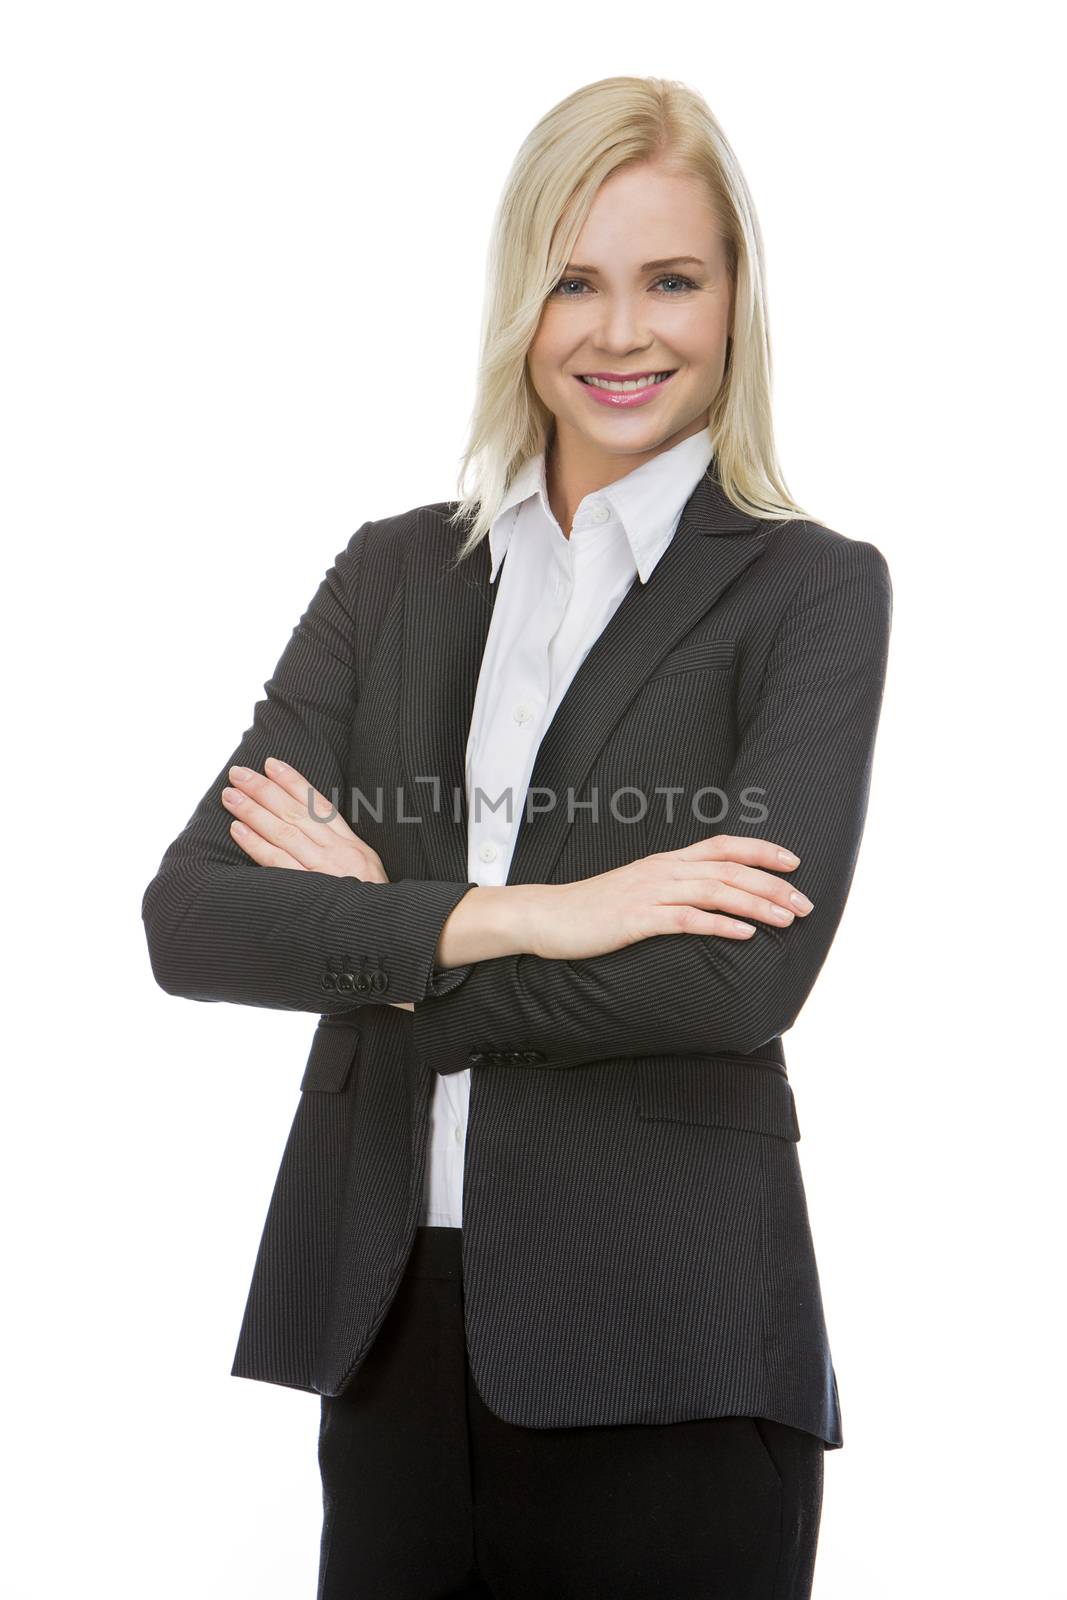 blonde businesswoman with her arms folded smiling at the camera